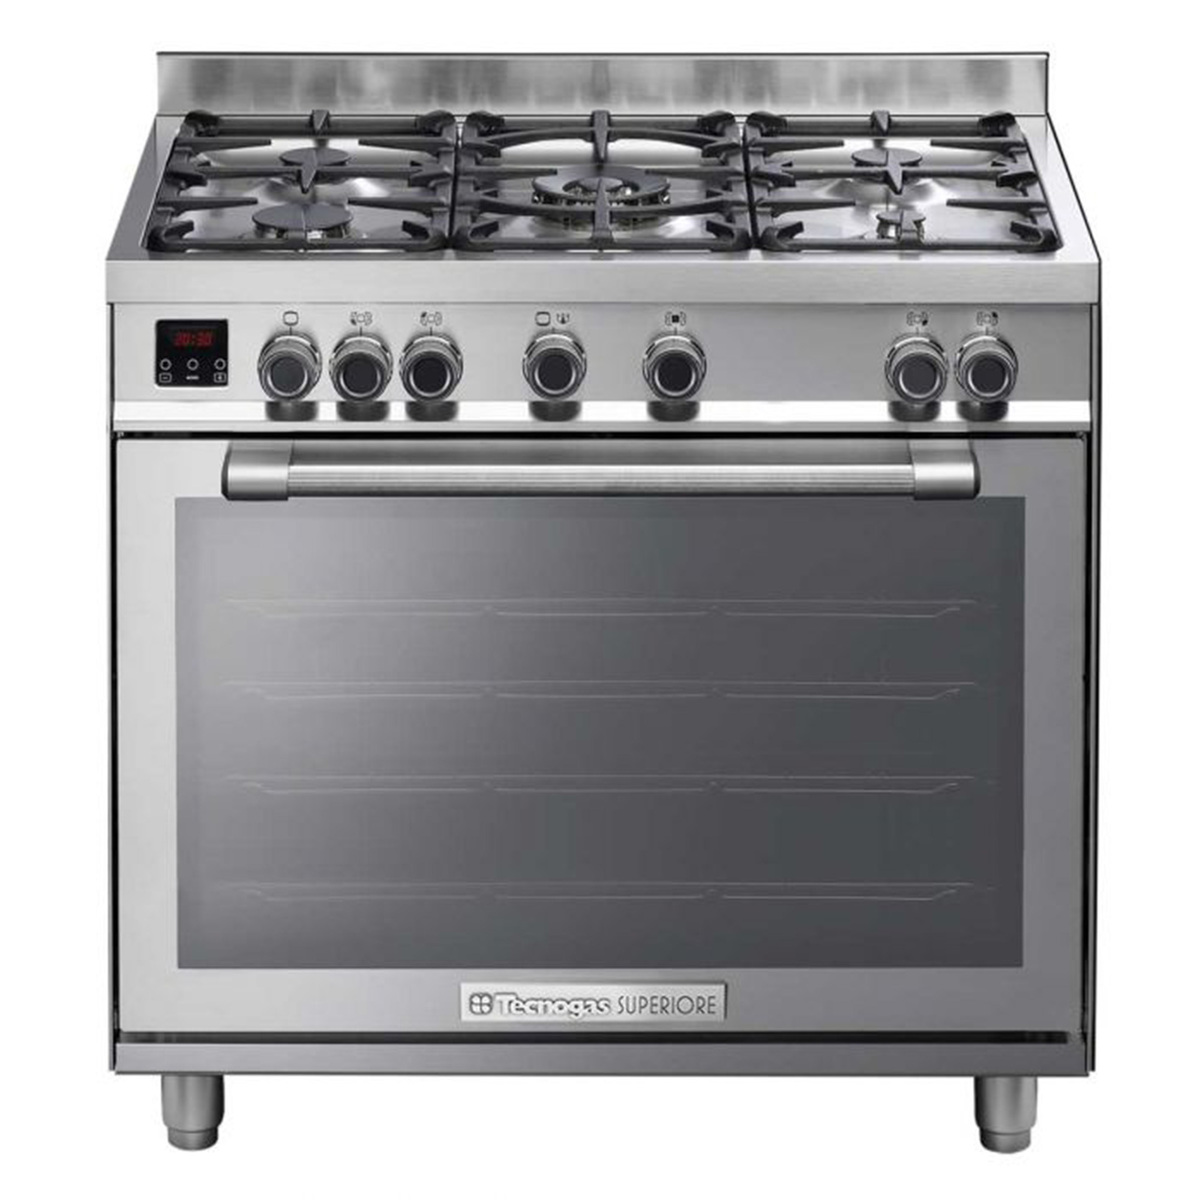 Tecnogas Superiore Ceramic Gas Cooker,Stainless Steel, 90x60, NG170XG5VC